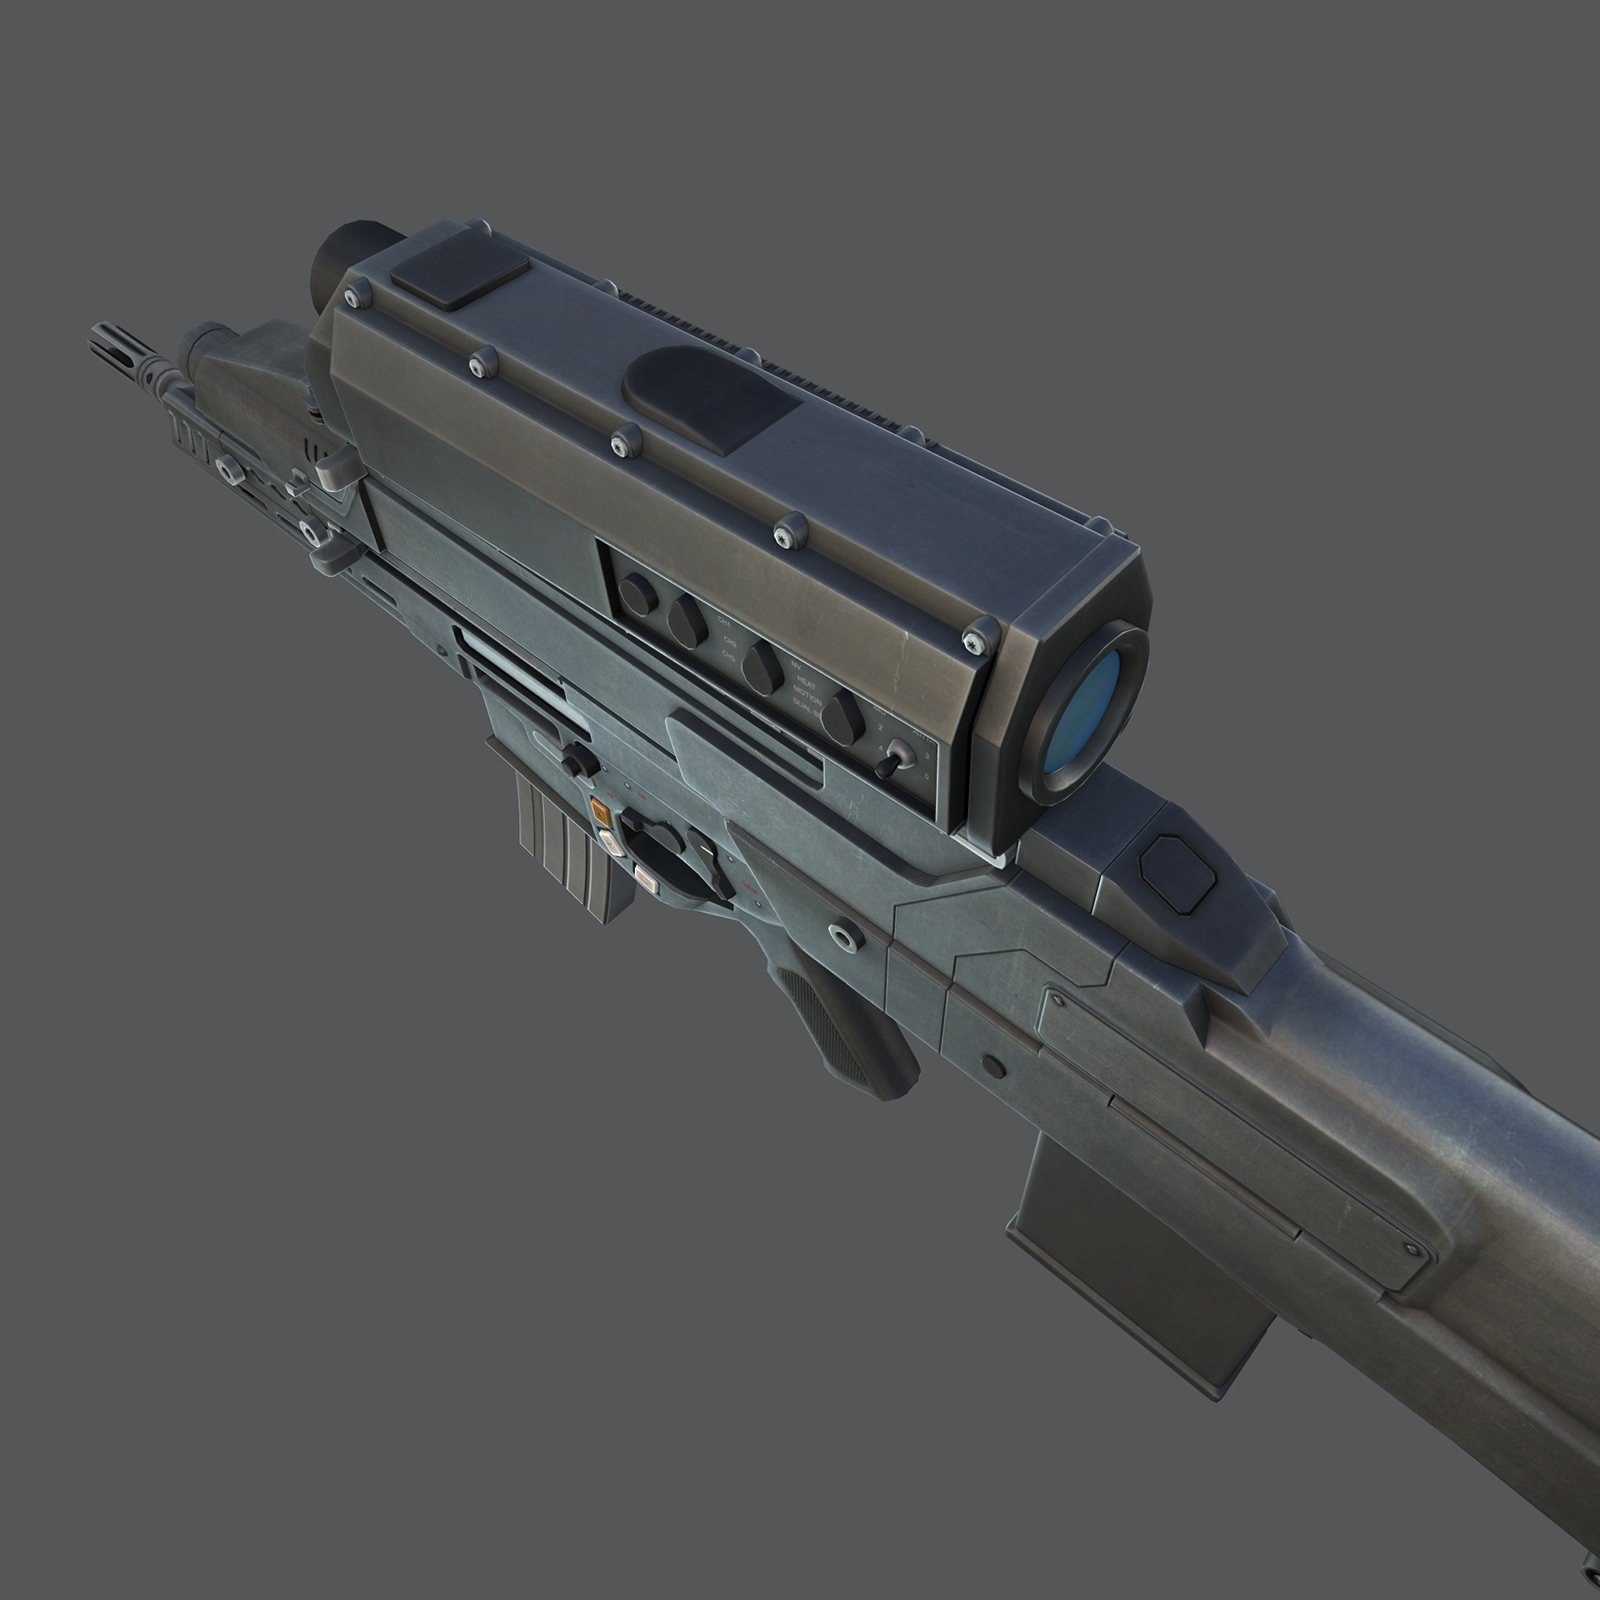 3d xm29 oicw rifle model